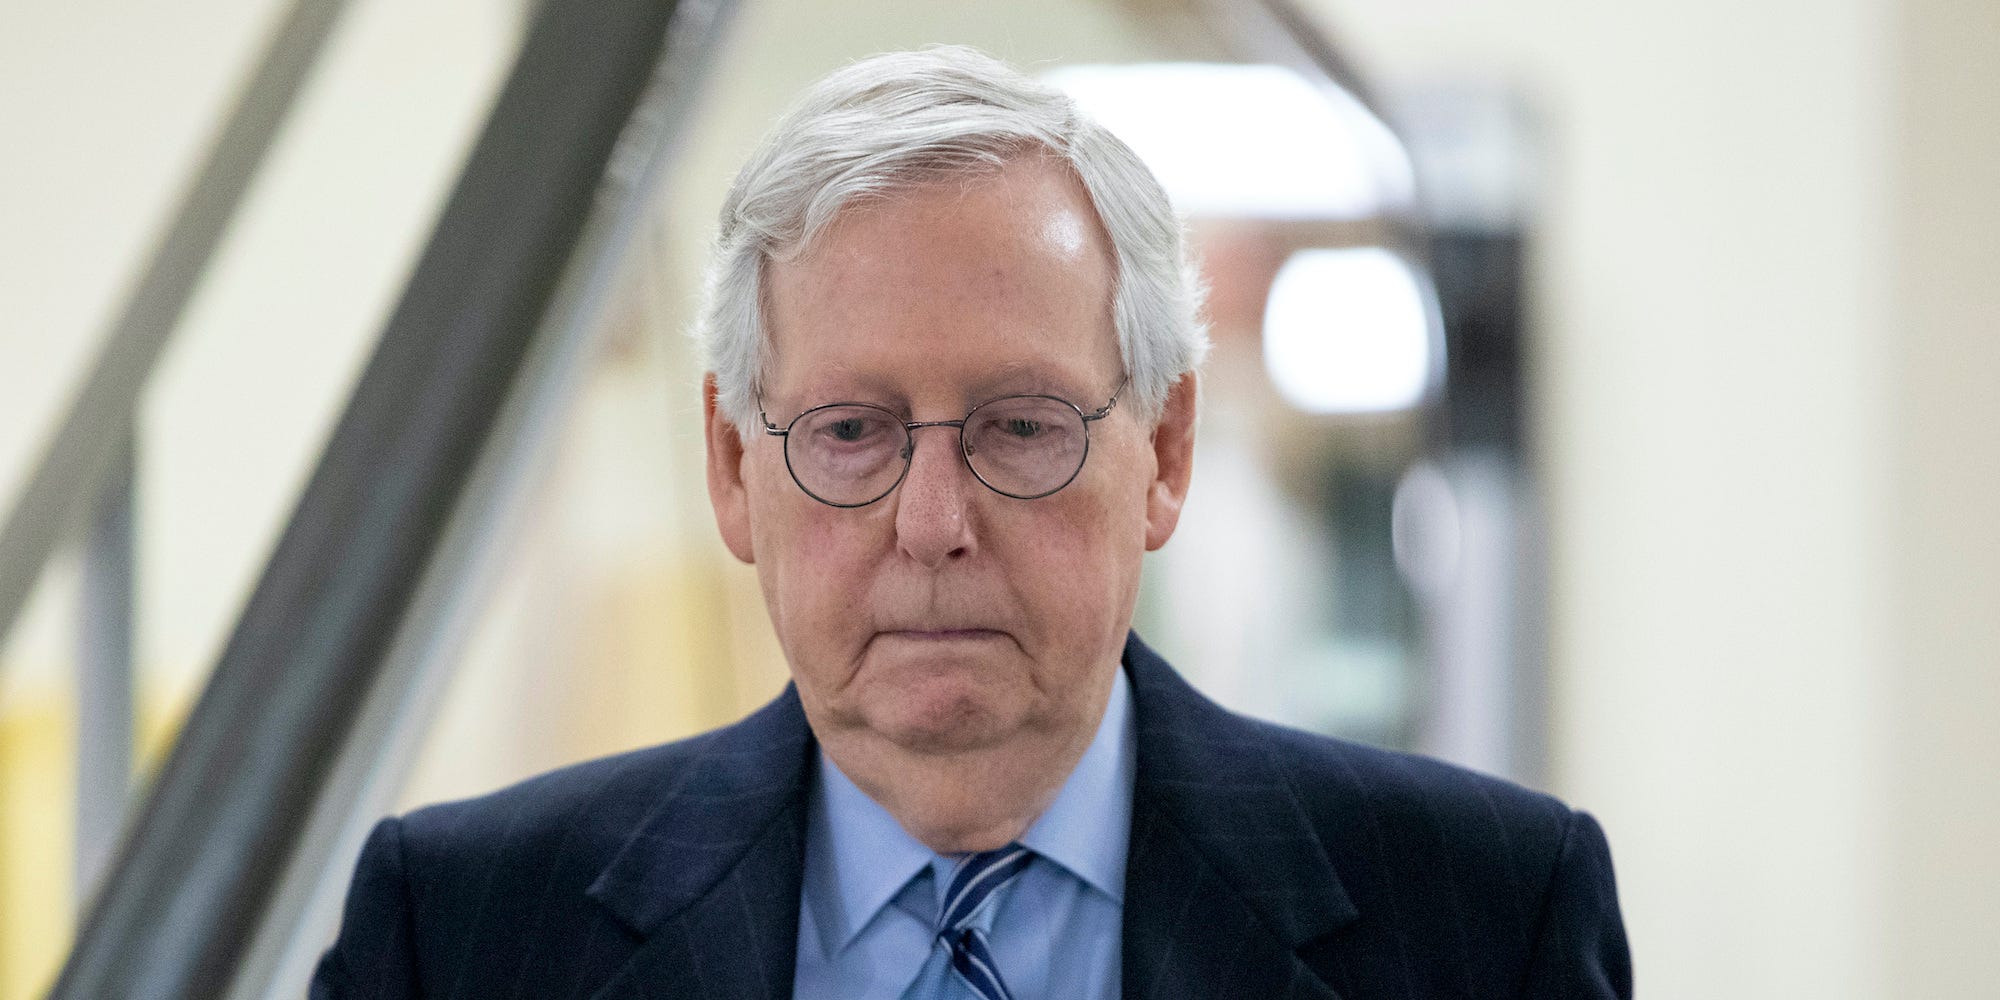 Senate Minority Leader Mitch McConnell, R-Ky. goes down an escalator at the Capitol in Washington, Wednesday, Jan. 19, 2022.